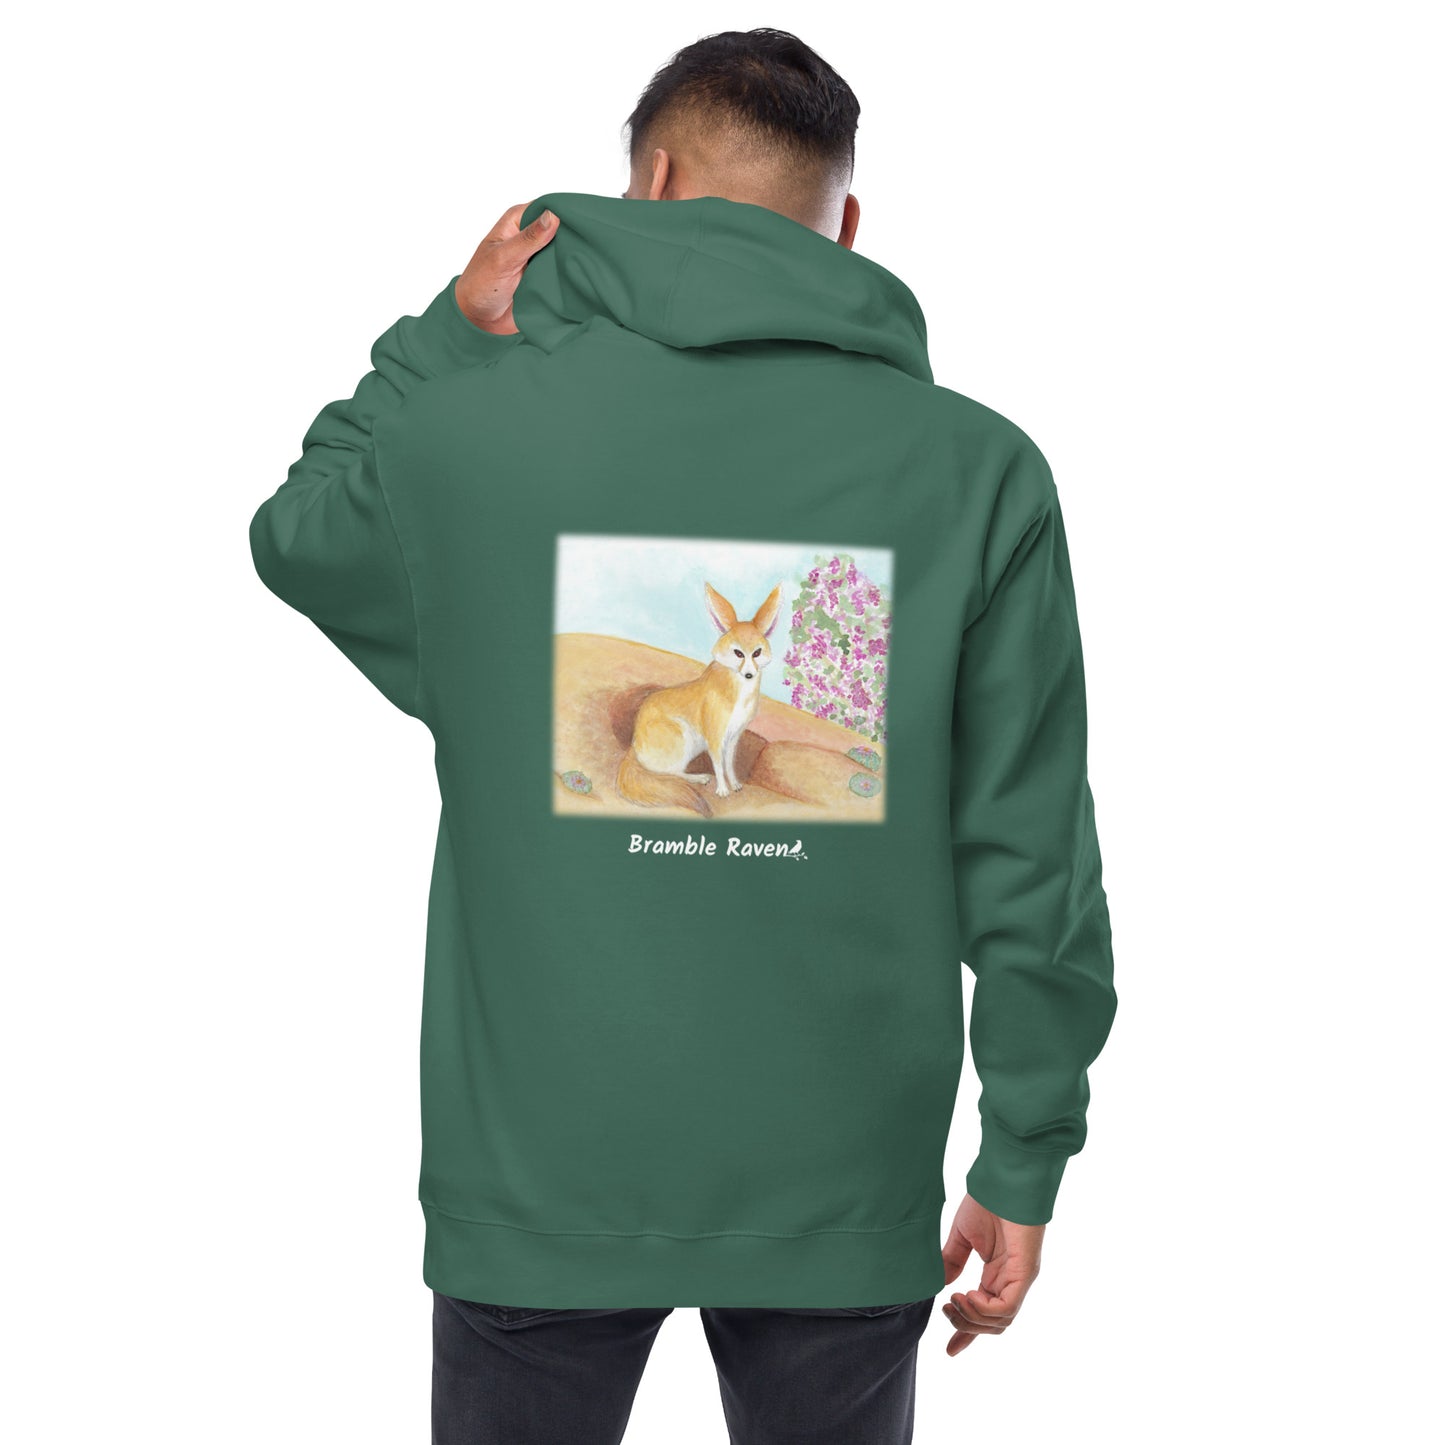 Unisex fleece-lined zip-up alpine green colored hoodie. Features original watercolor painting of a fennec fox in the desert on the back of the hoodie. Shown on male model.